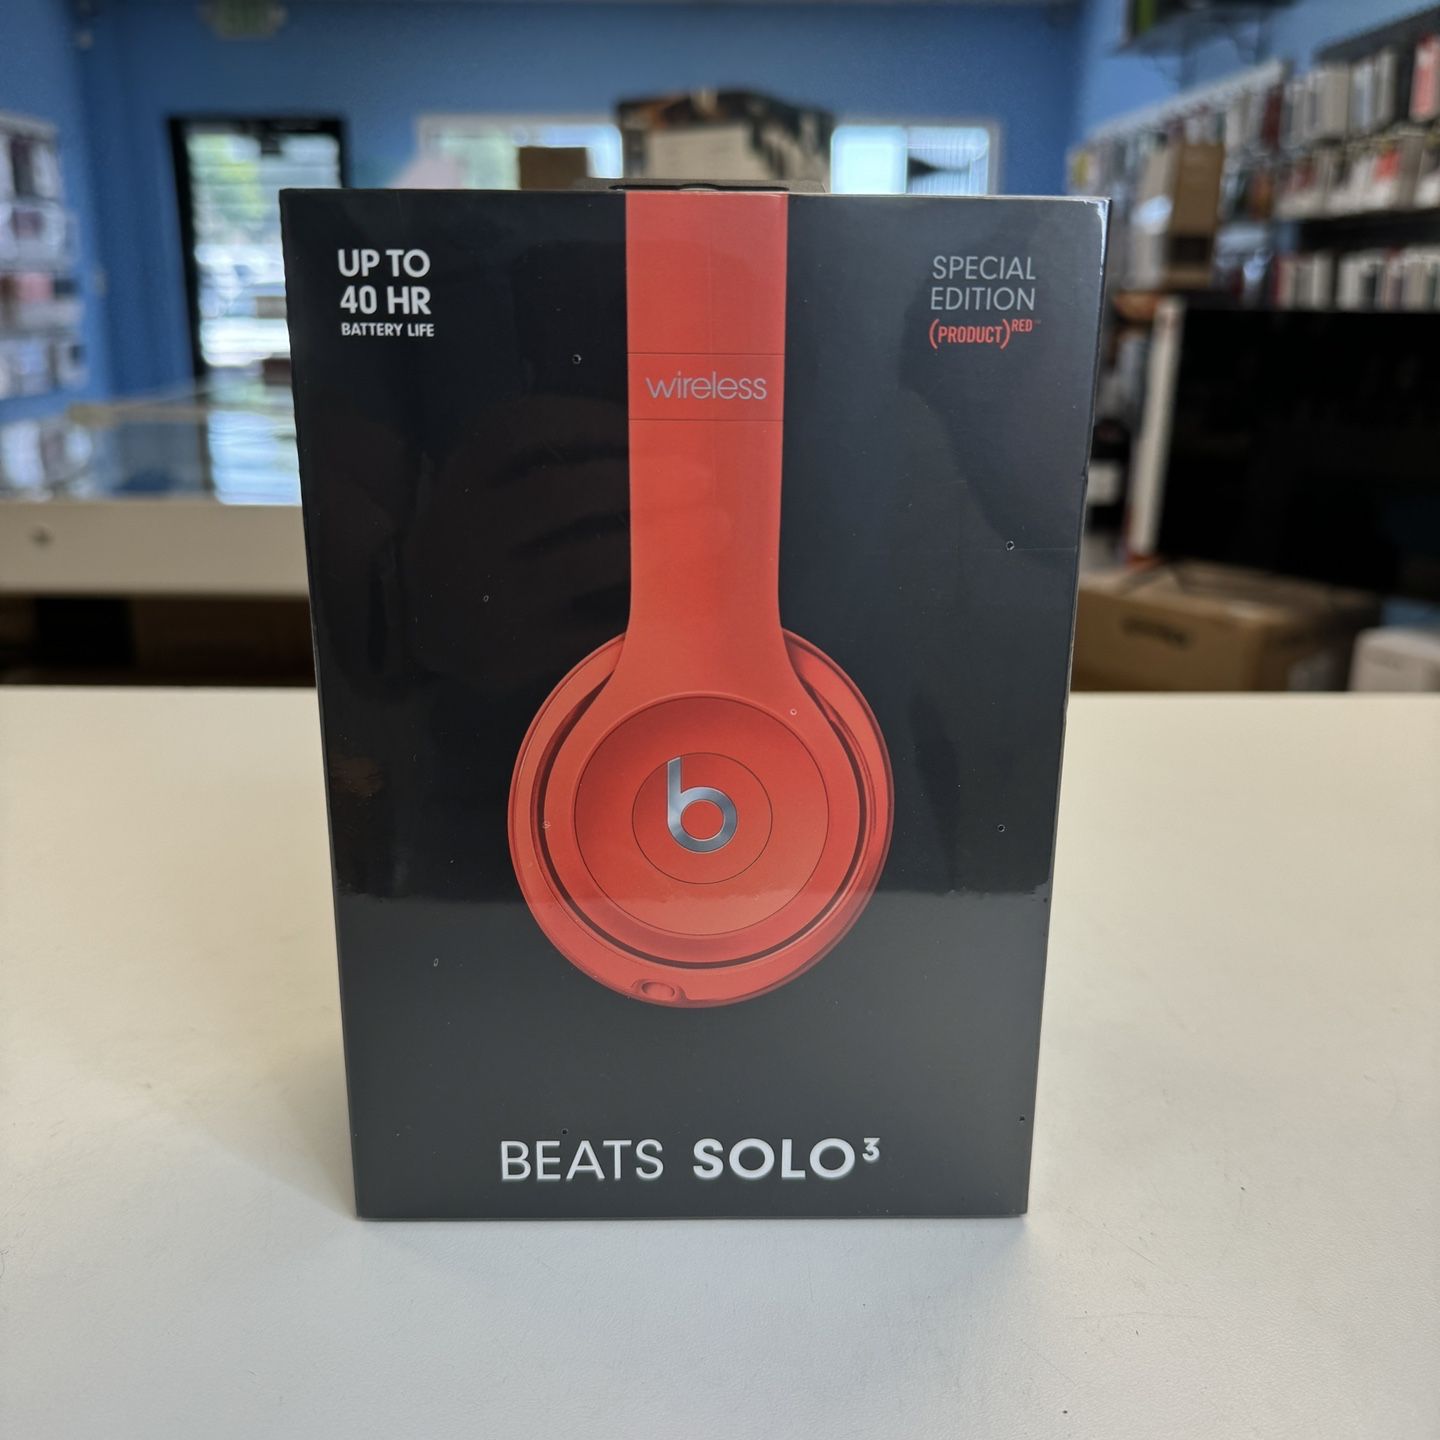 Beats Solo3 Wireless Headphones - (PRODUCT)RED Citrus Red Apple Care Till 2025